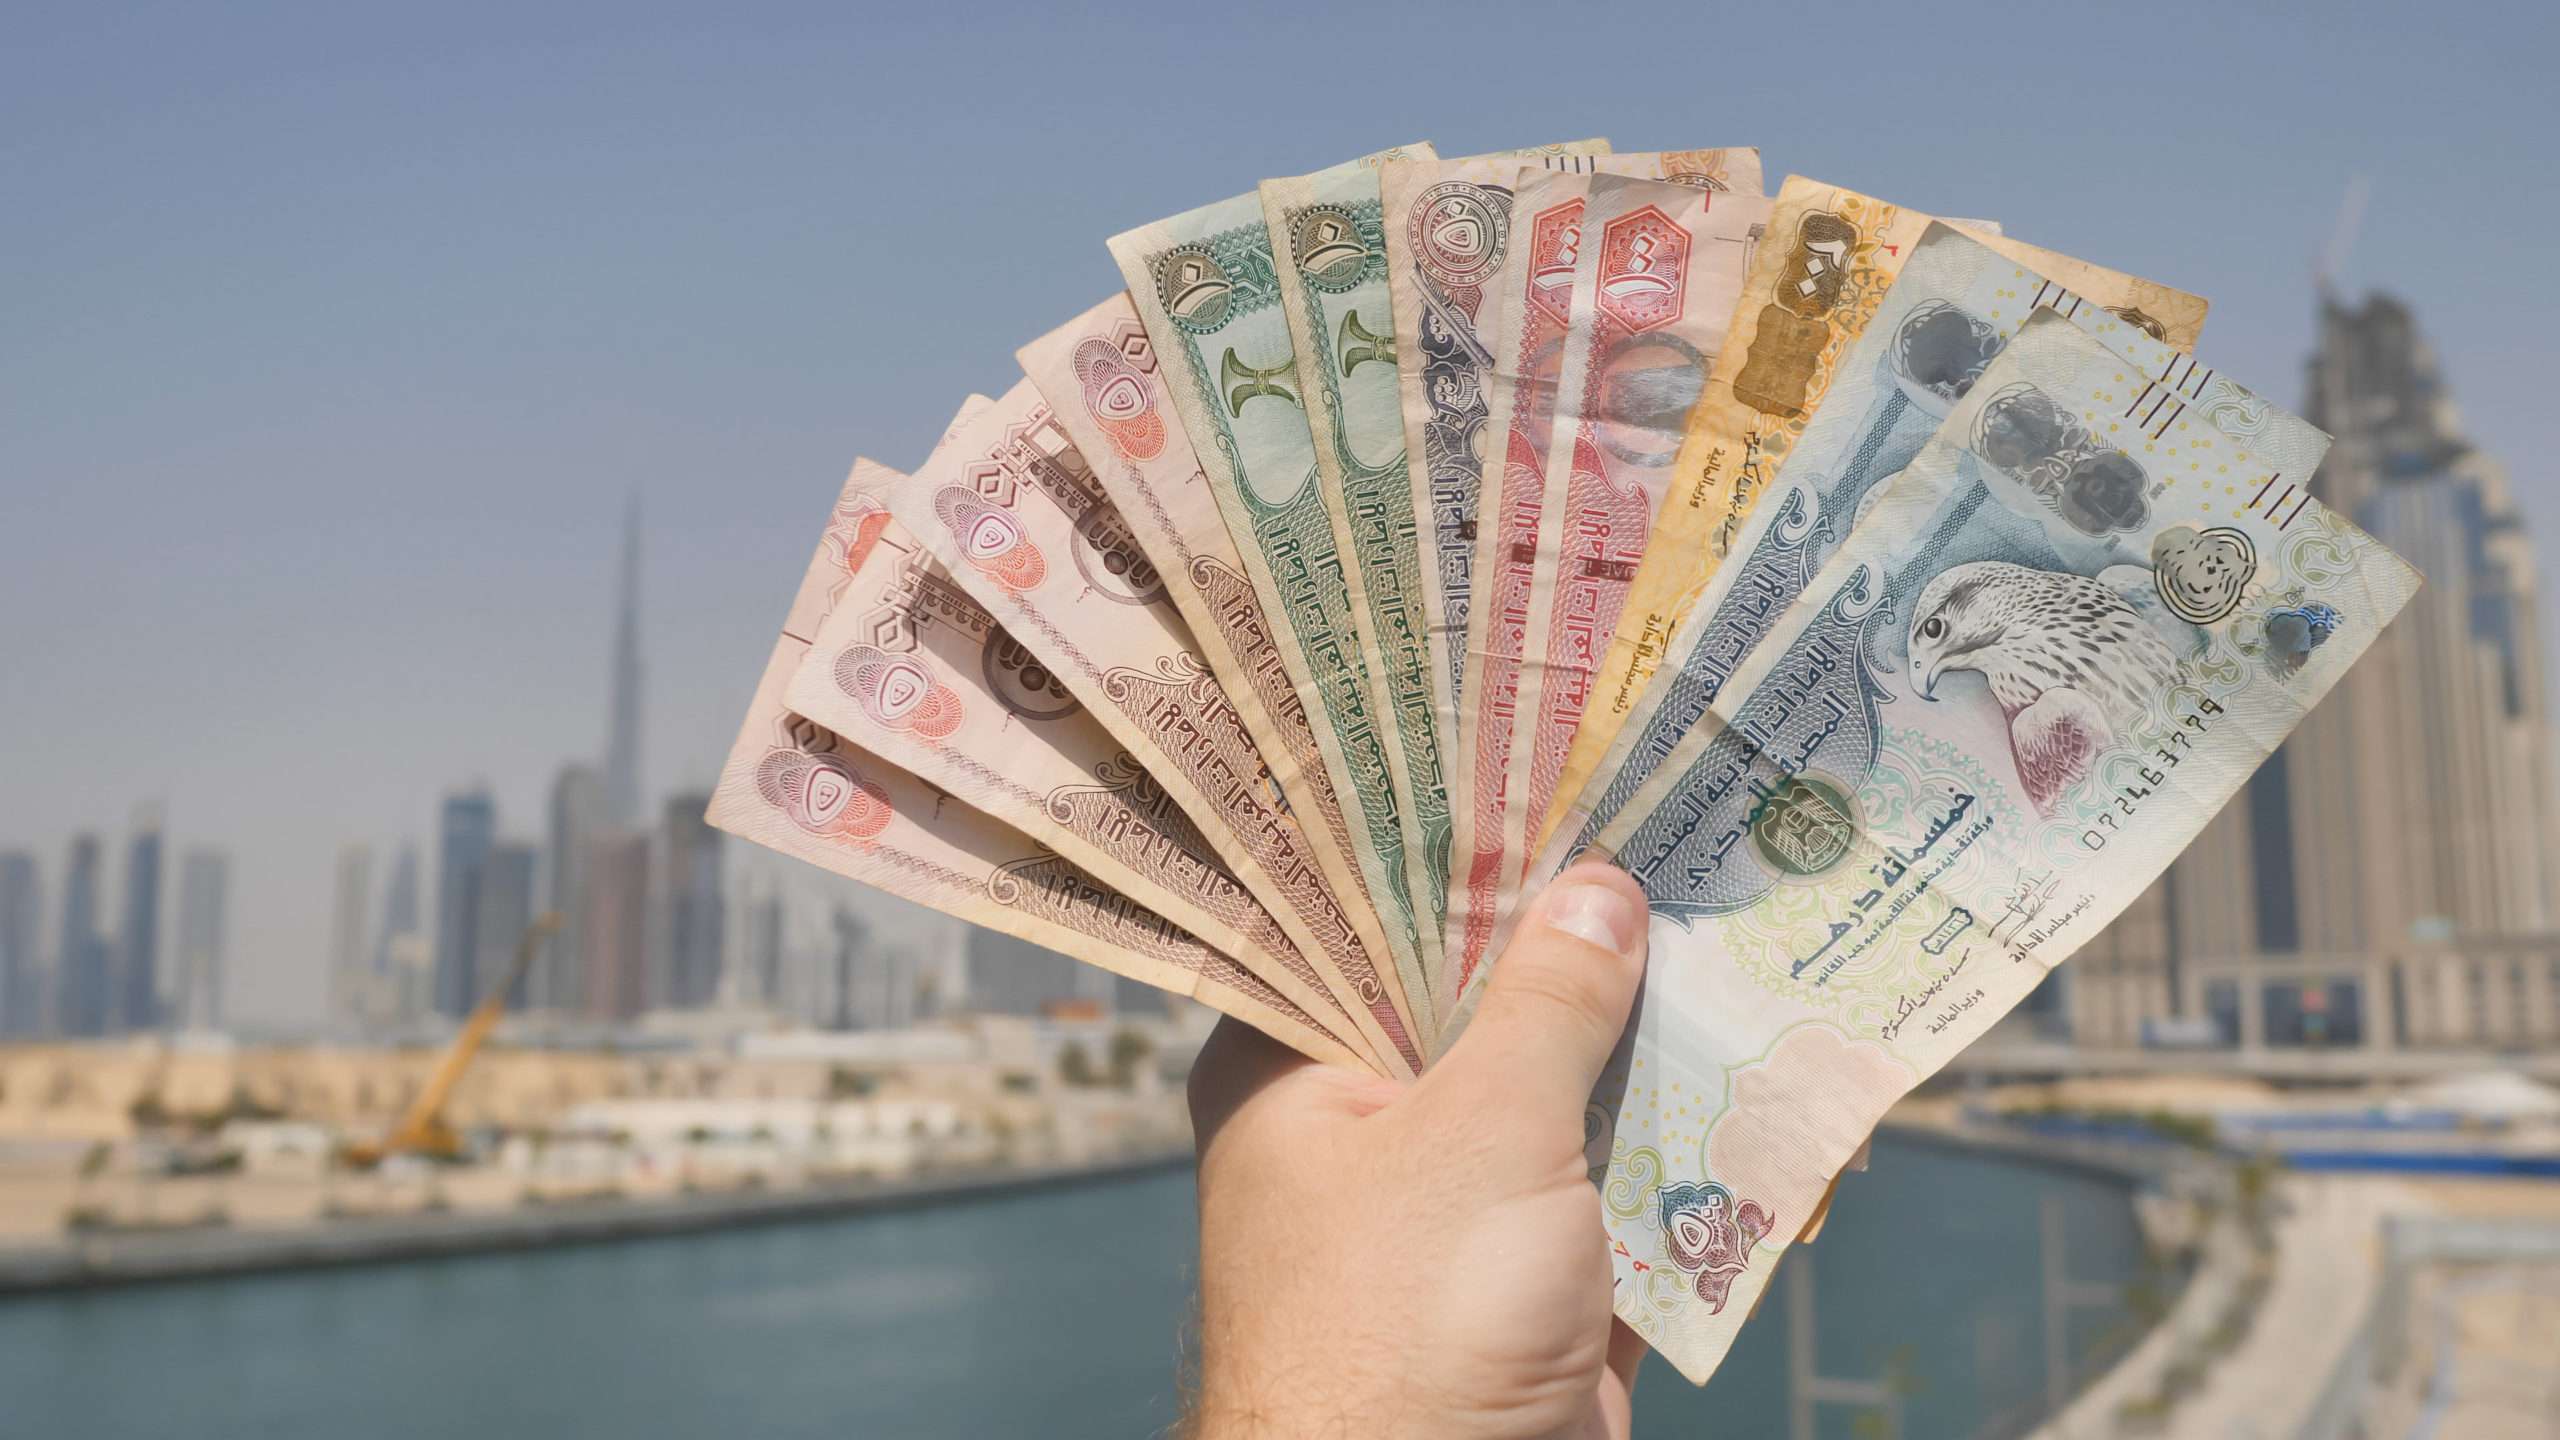 Dubai Travel Learn About Currency, Cards, ATMs And More